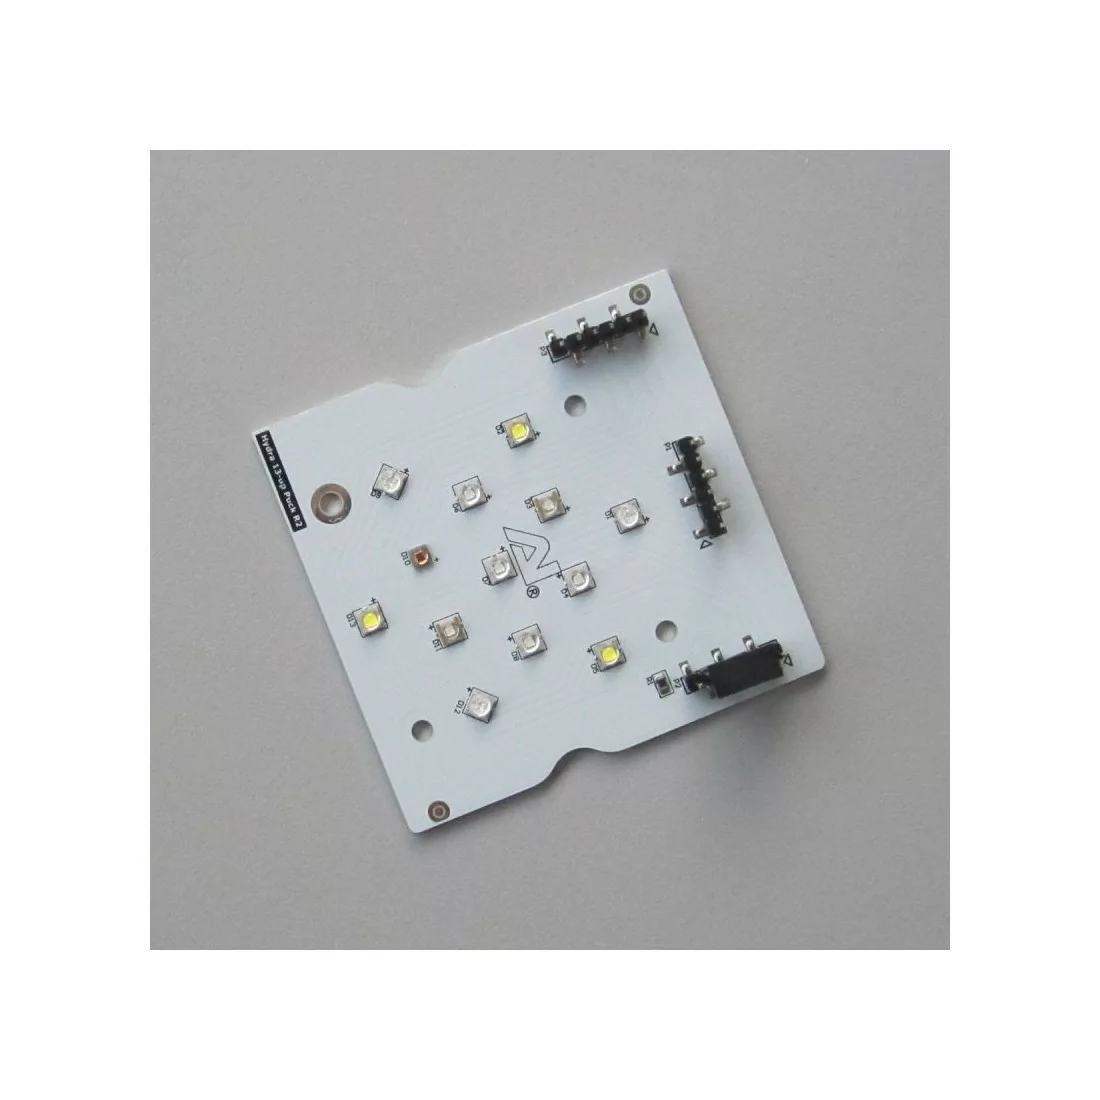 Replacement led pad for Hydra 26/52 HD from Aquaillumination